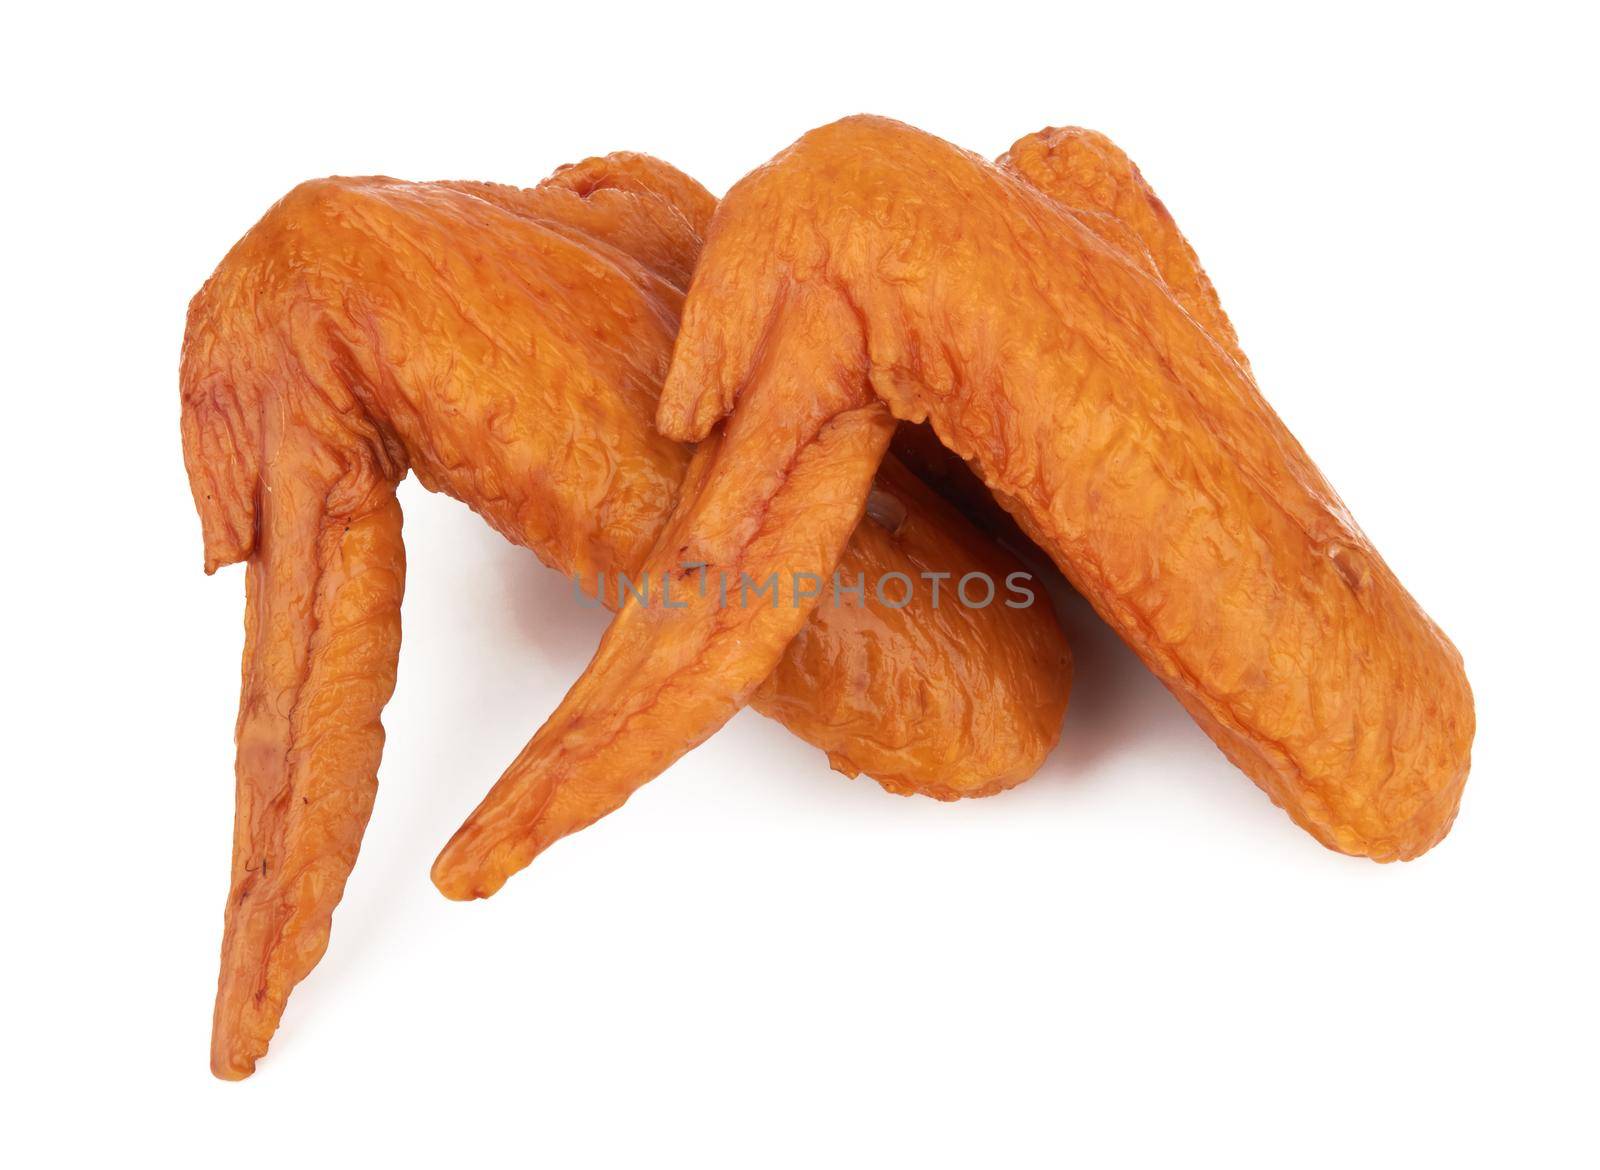 Smoked chicken wings isolated on a white background